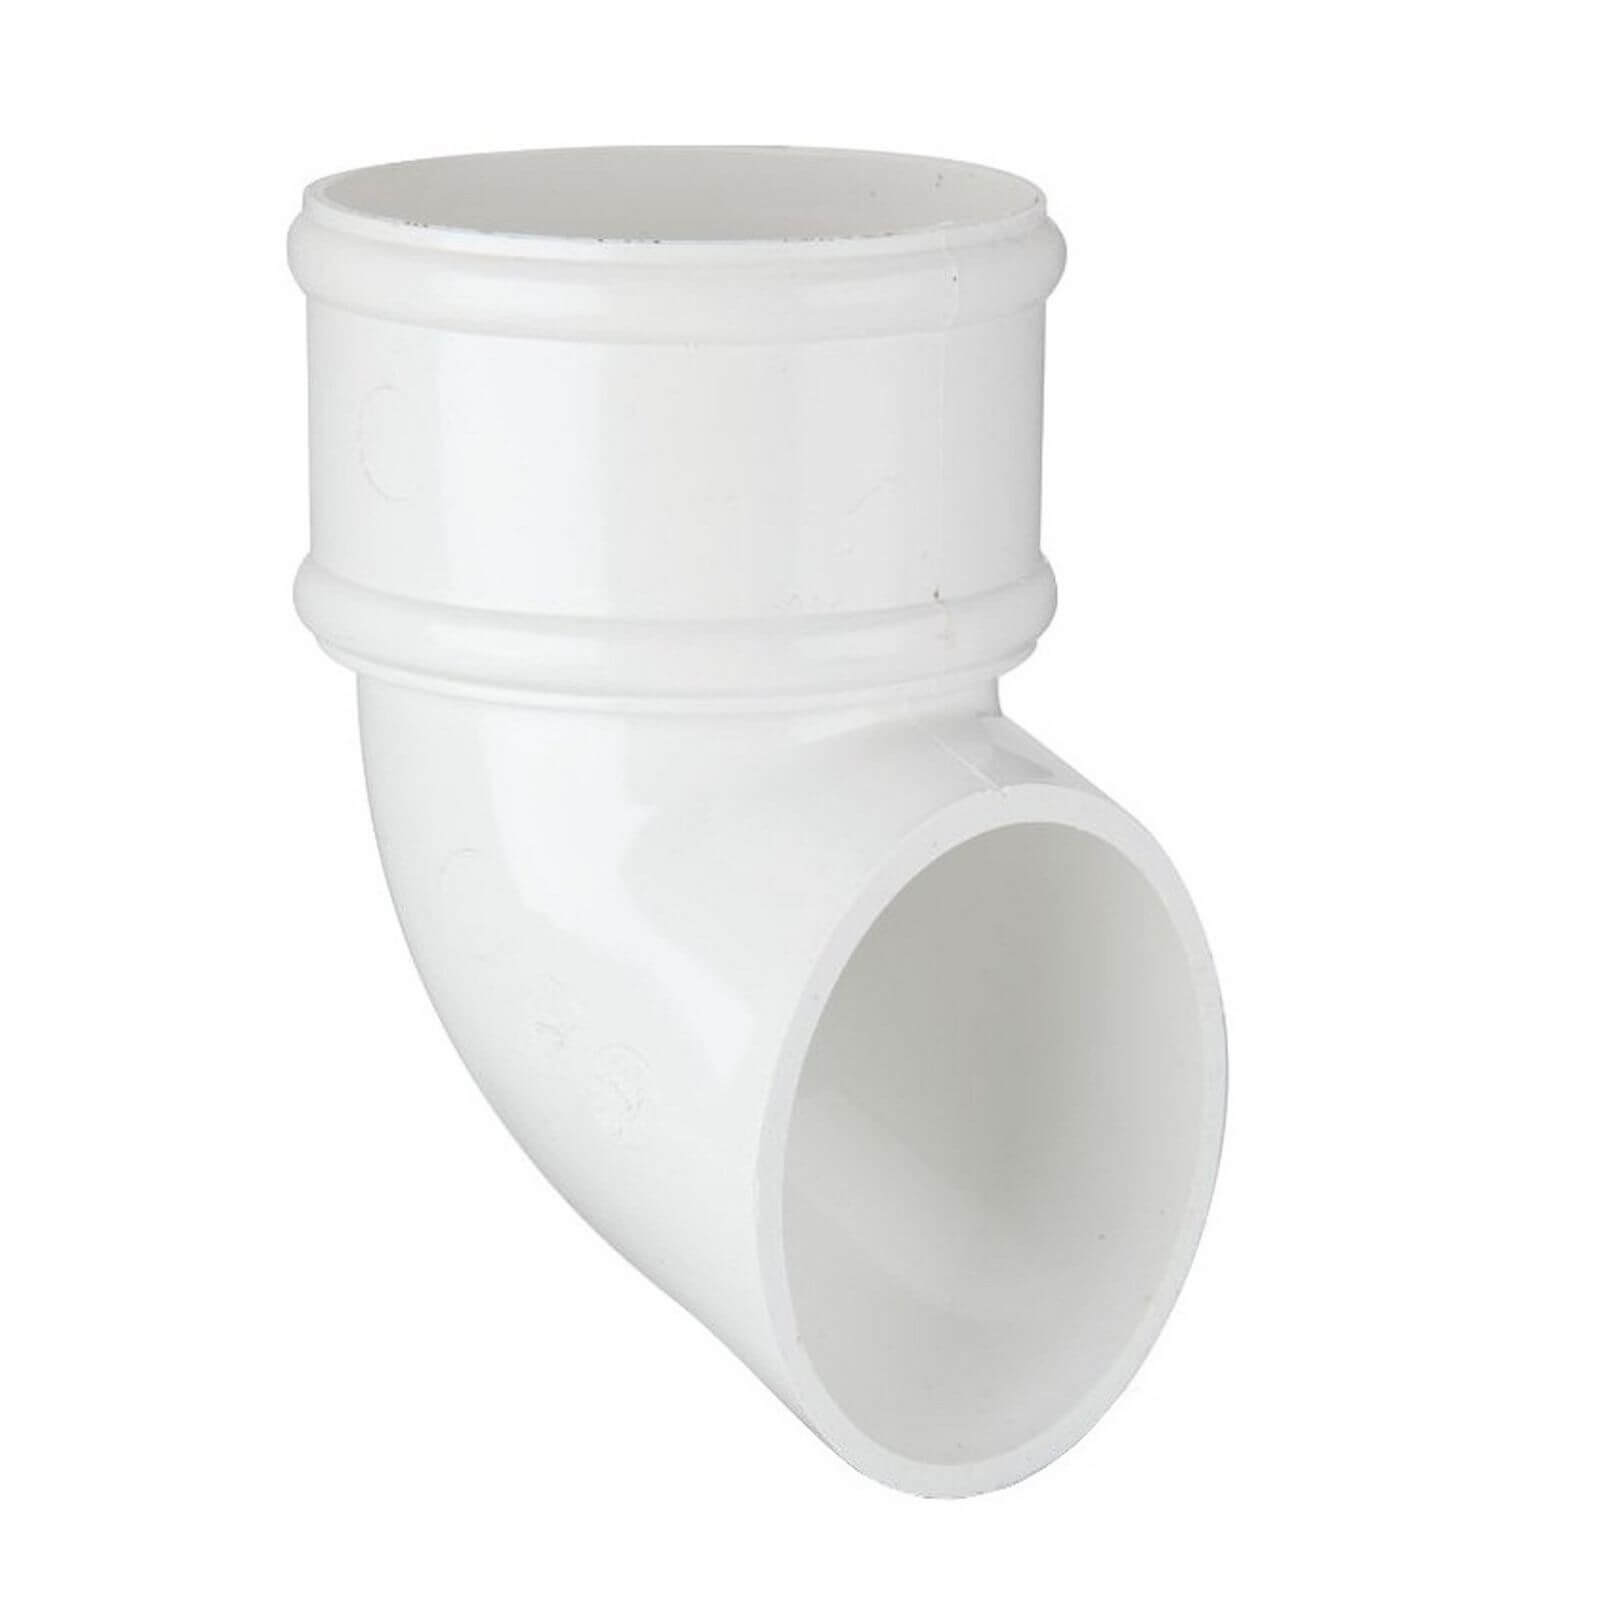 Polypipe Round Downpipe Shoe - 68mm - White